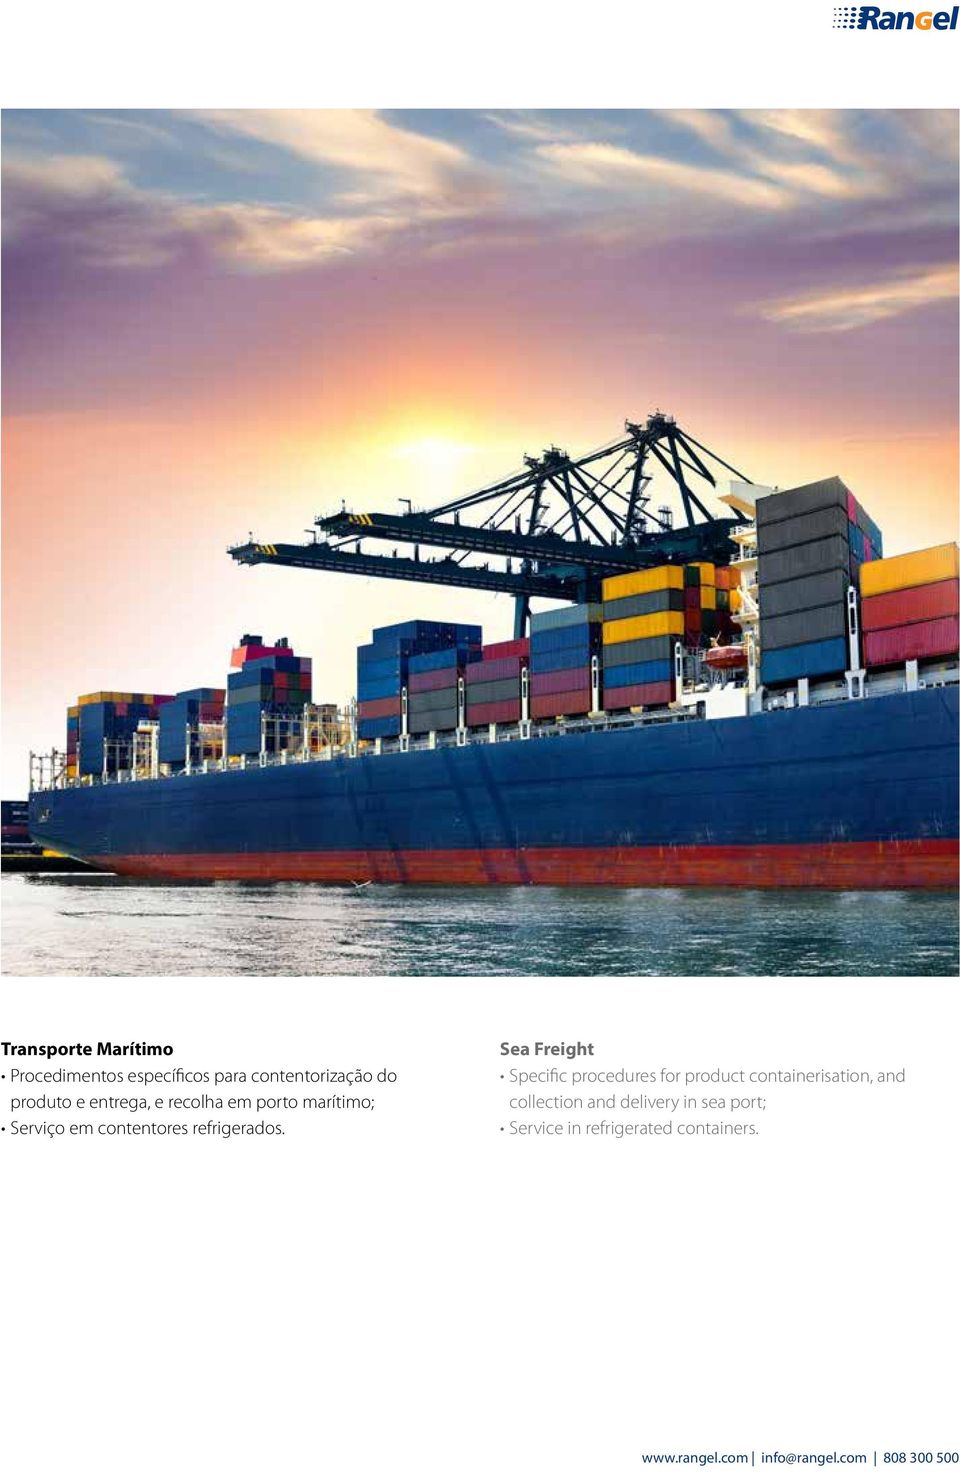 Sea Freight Specific procedures for product containerisation, and collection and